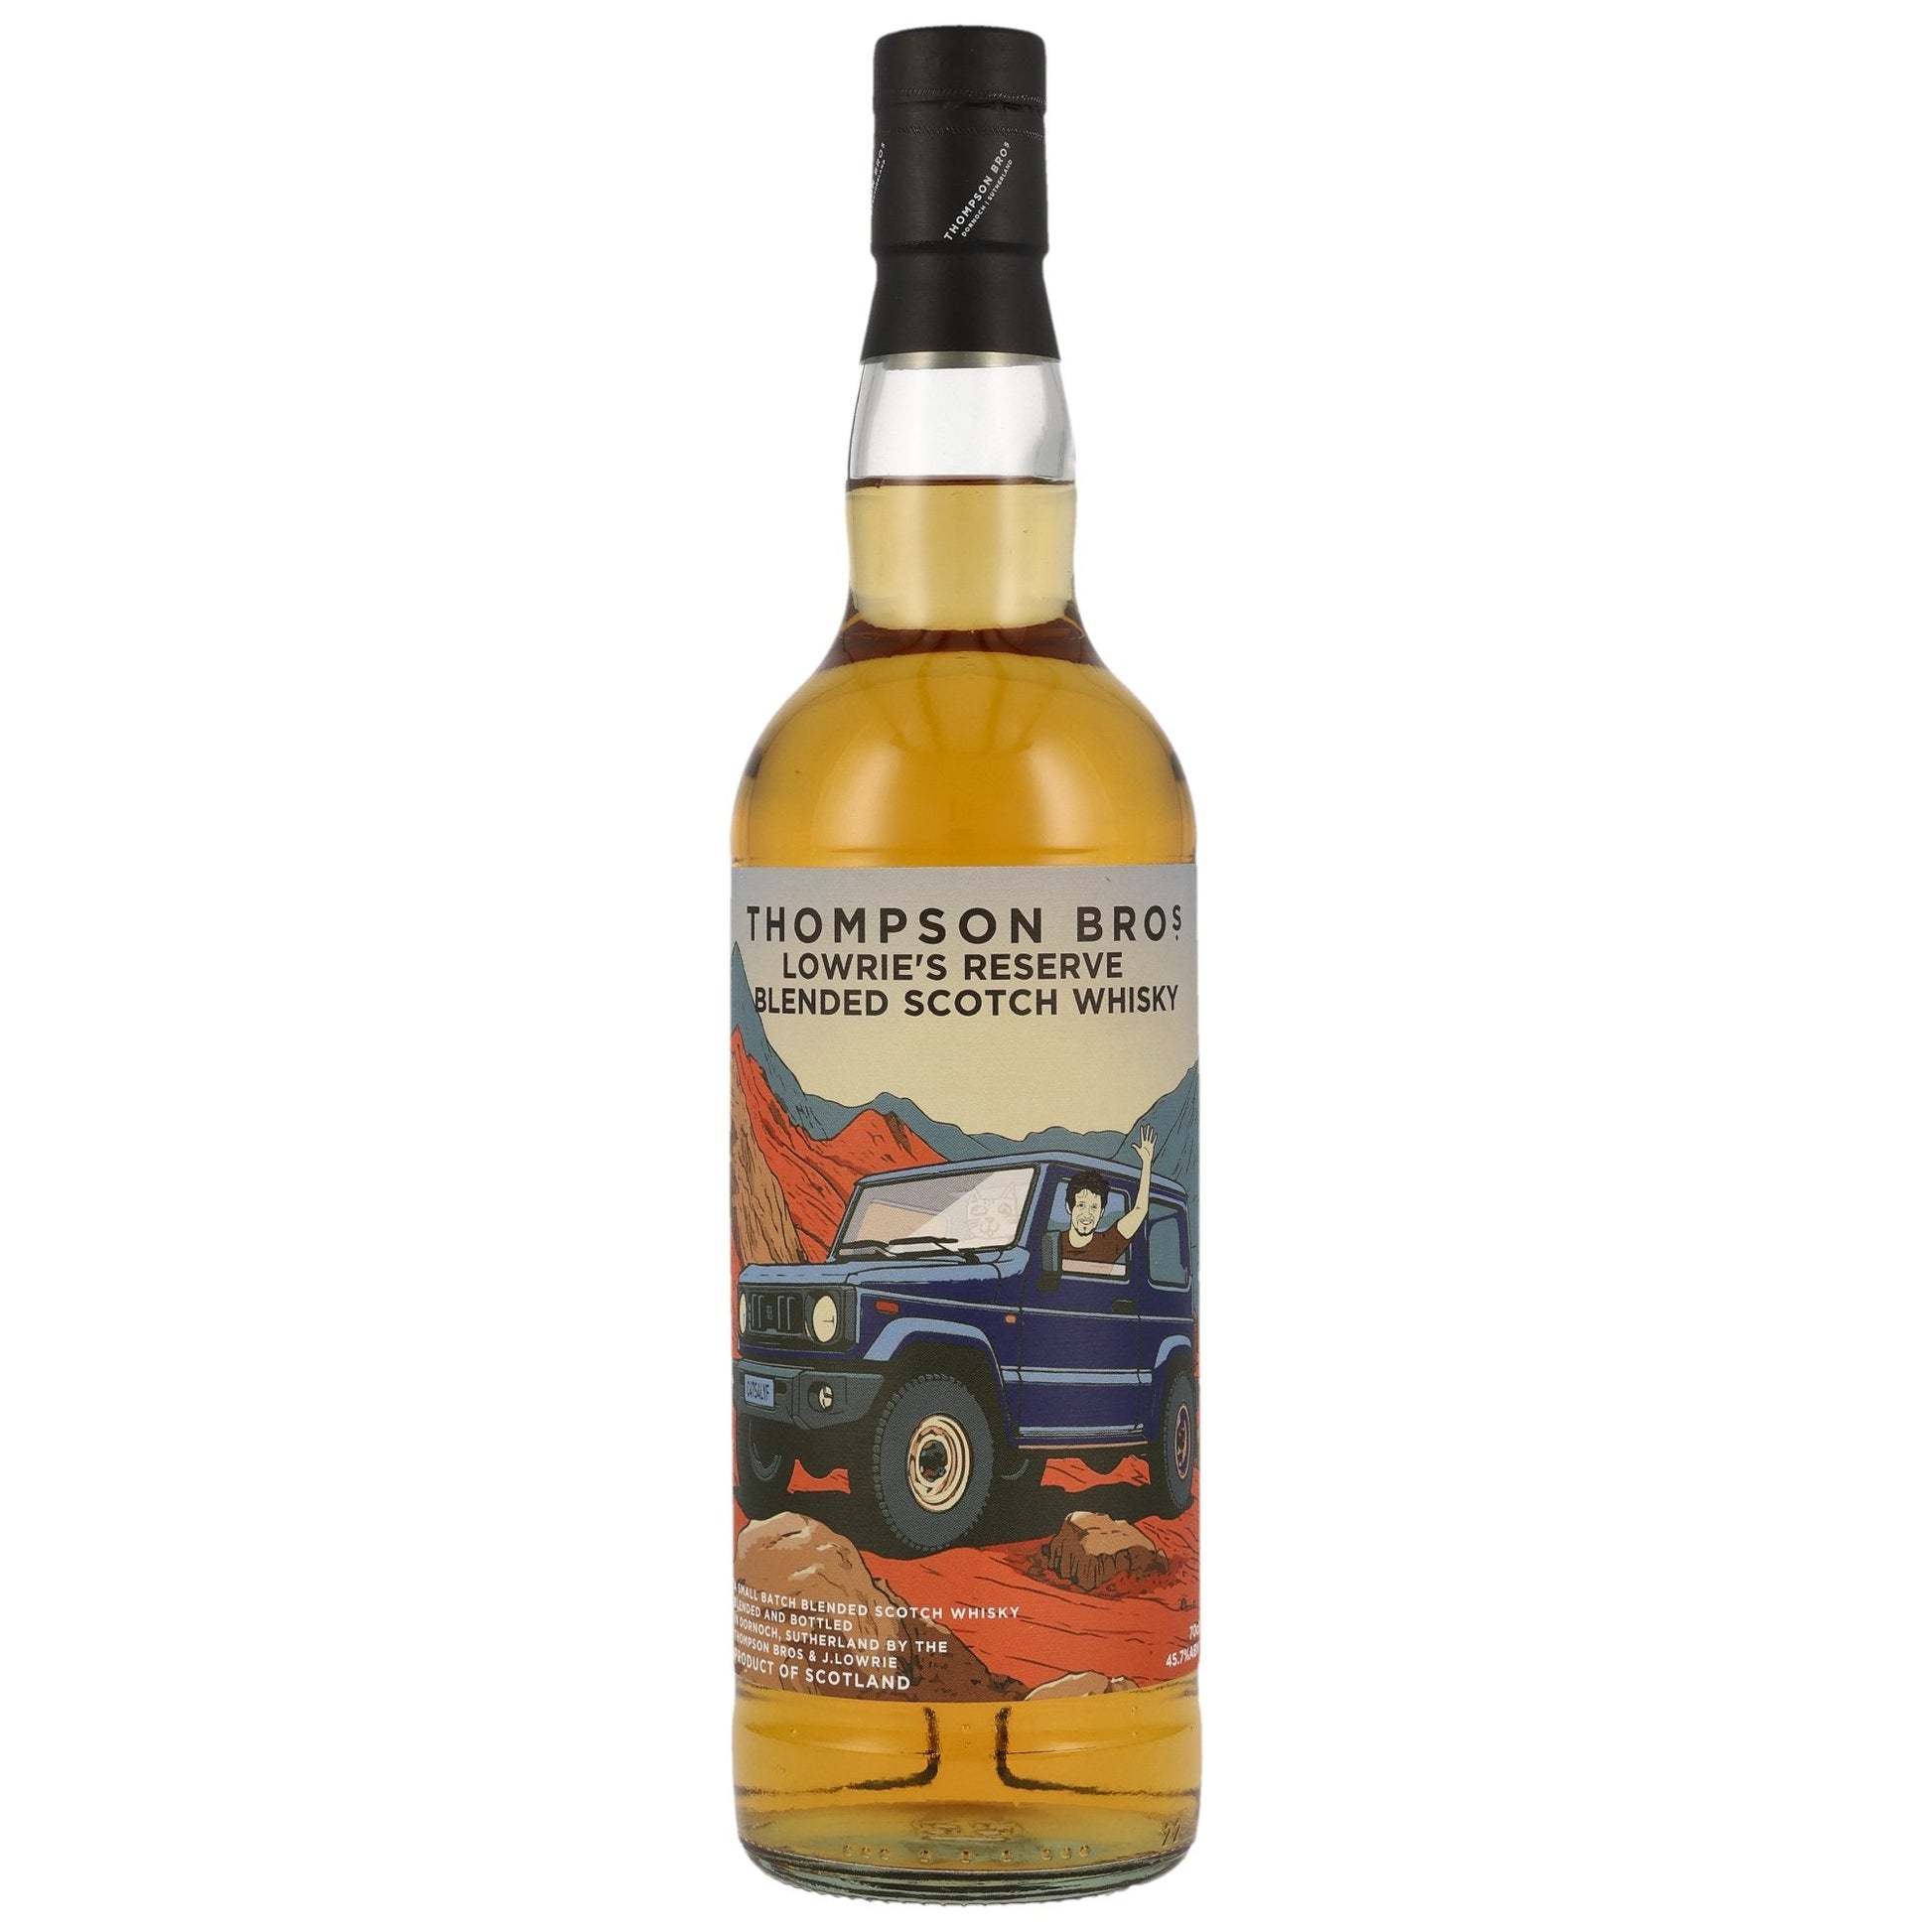 Lowrie’s Reserve | Thompson Bros. | Blended Scotch Whisky | 45,7%GET A BOTTLE